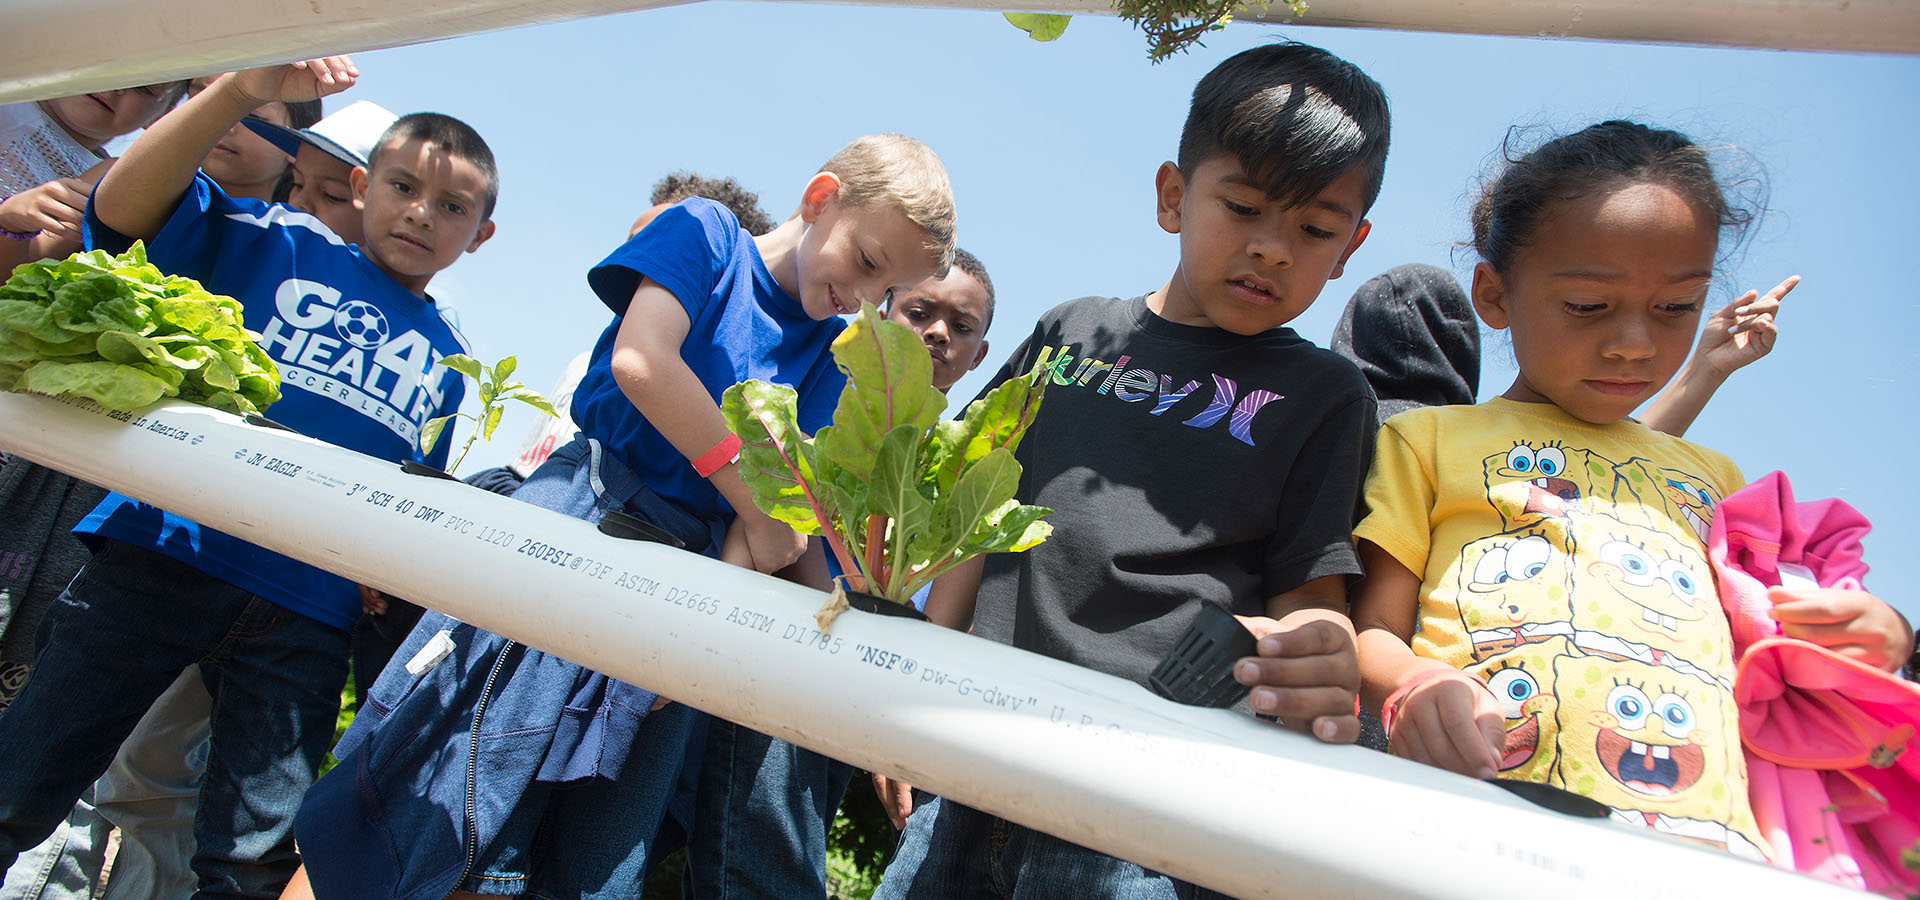 Schoolchildren look at plants growing in an outdoor hydroponic system.